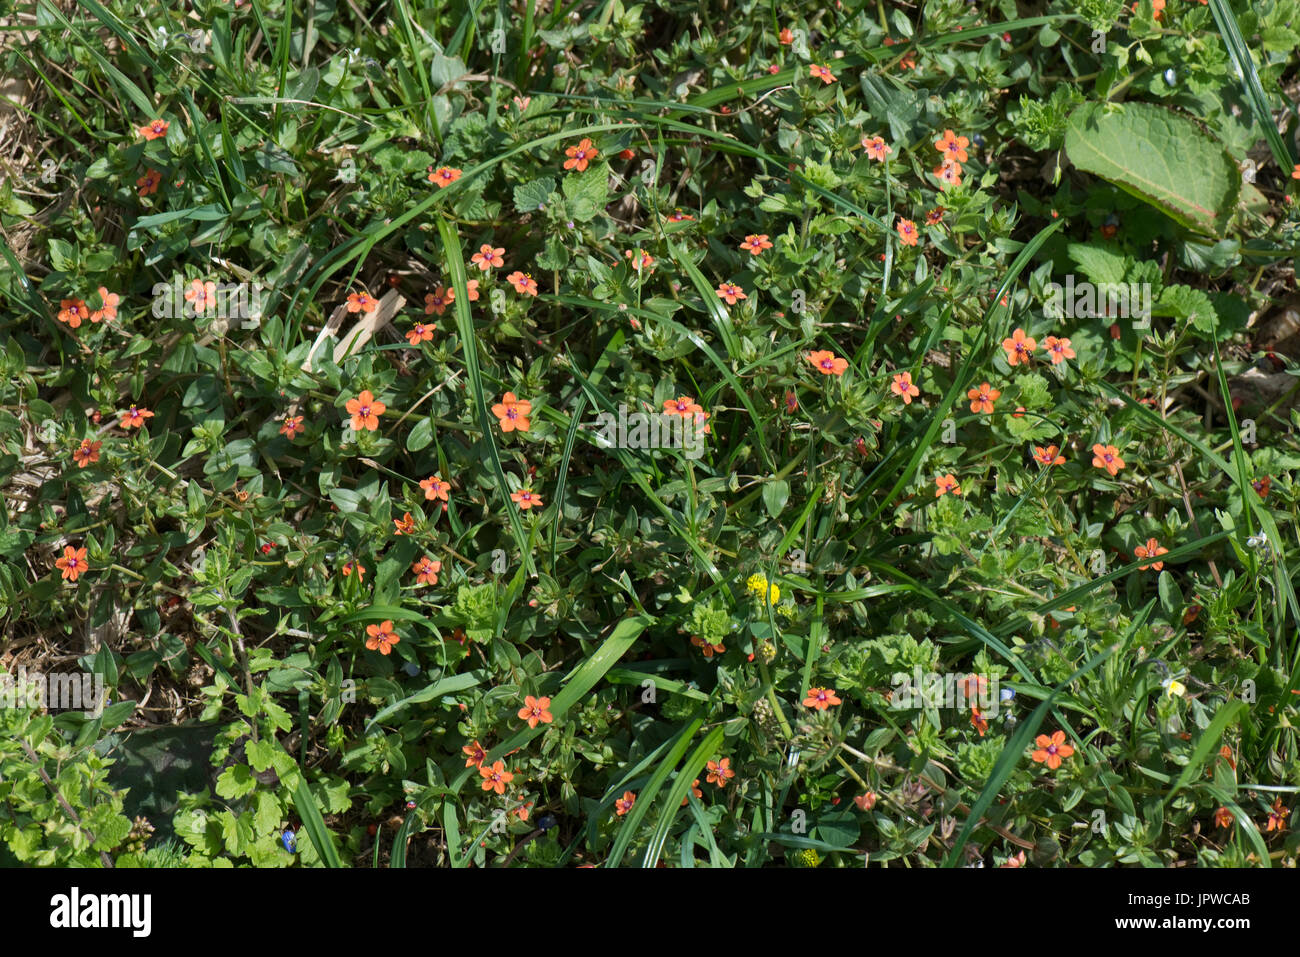 Scarlet pimpernel, Anagallis arvensis, red flowering annual arable weed in young grass ley, Berkshire, July Stock Photo